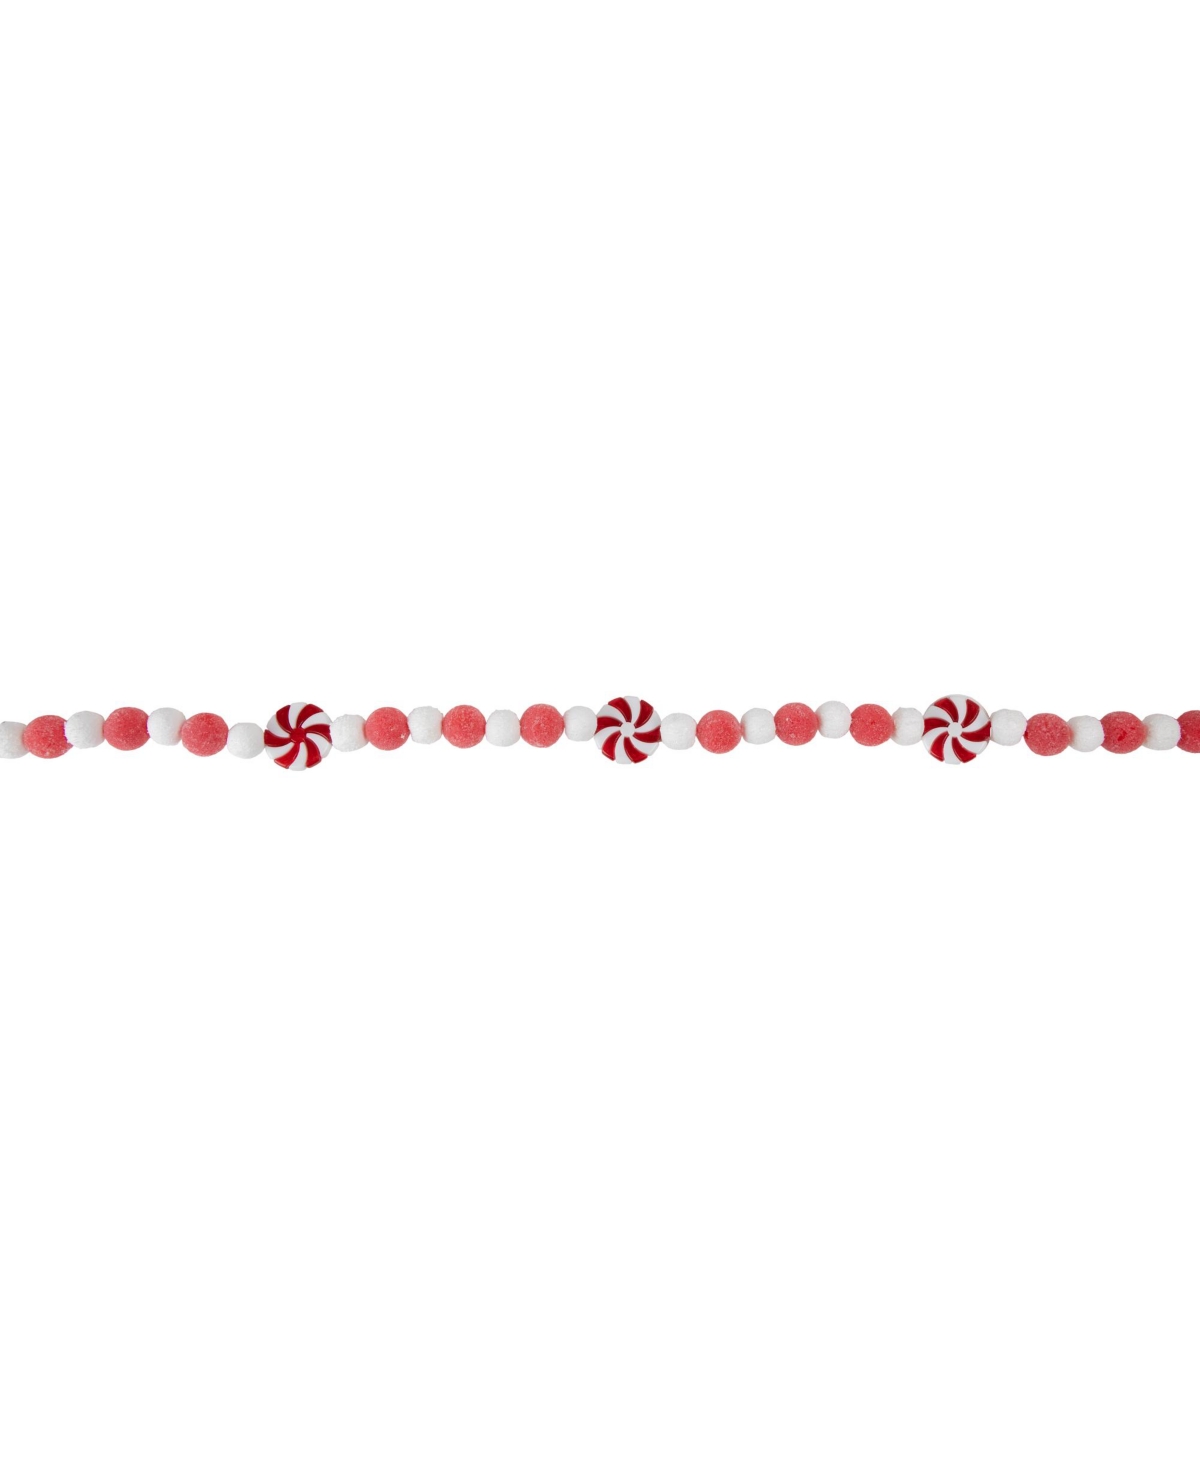 Northlight Unlit Peppermint Candy Beaded Christmas Garland, 4' In Red